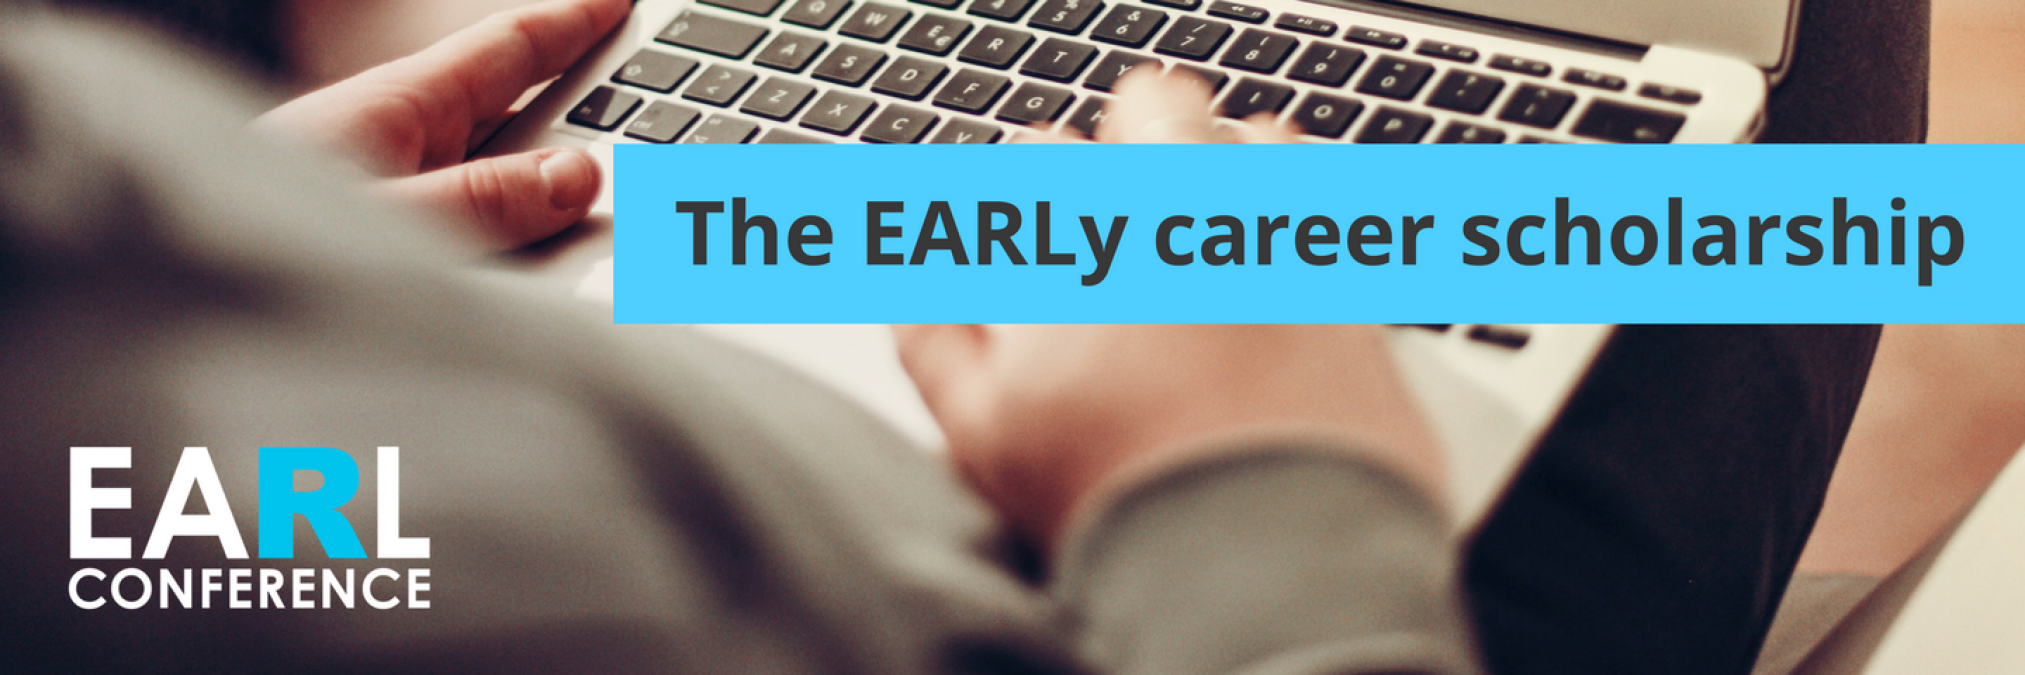 The EARLy career scholarship